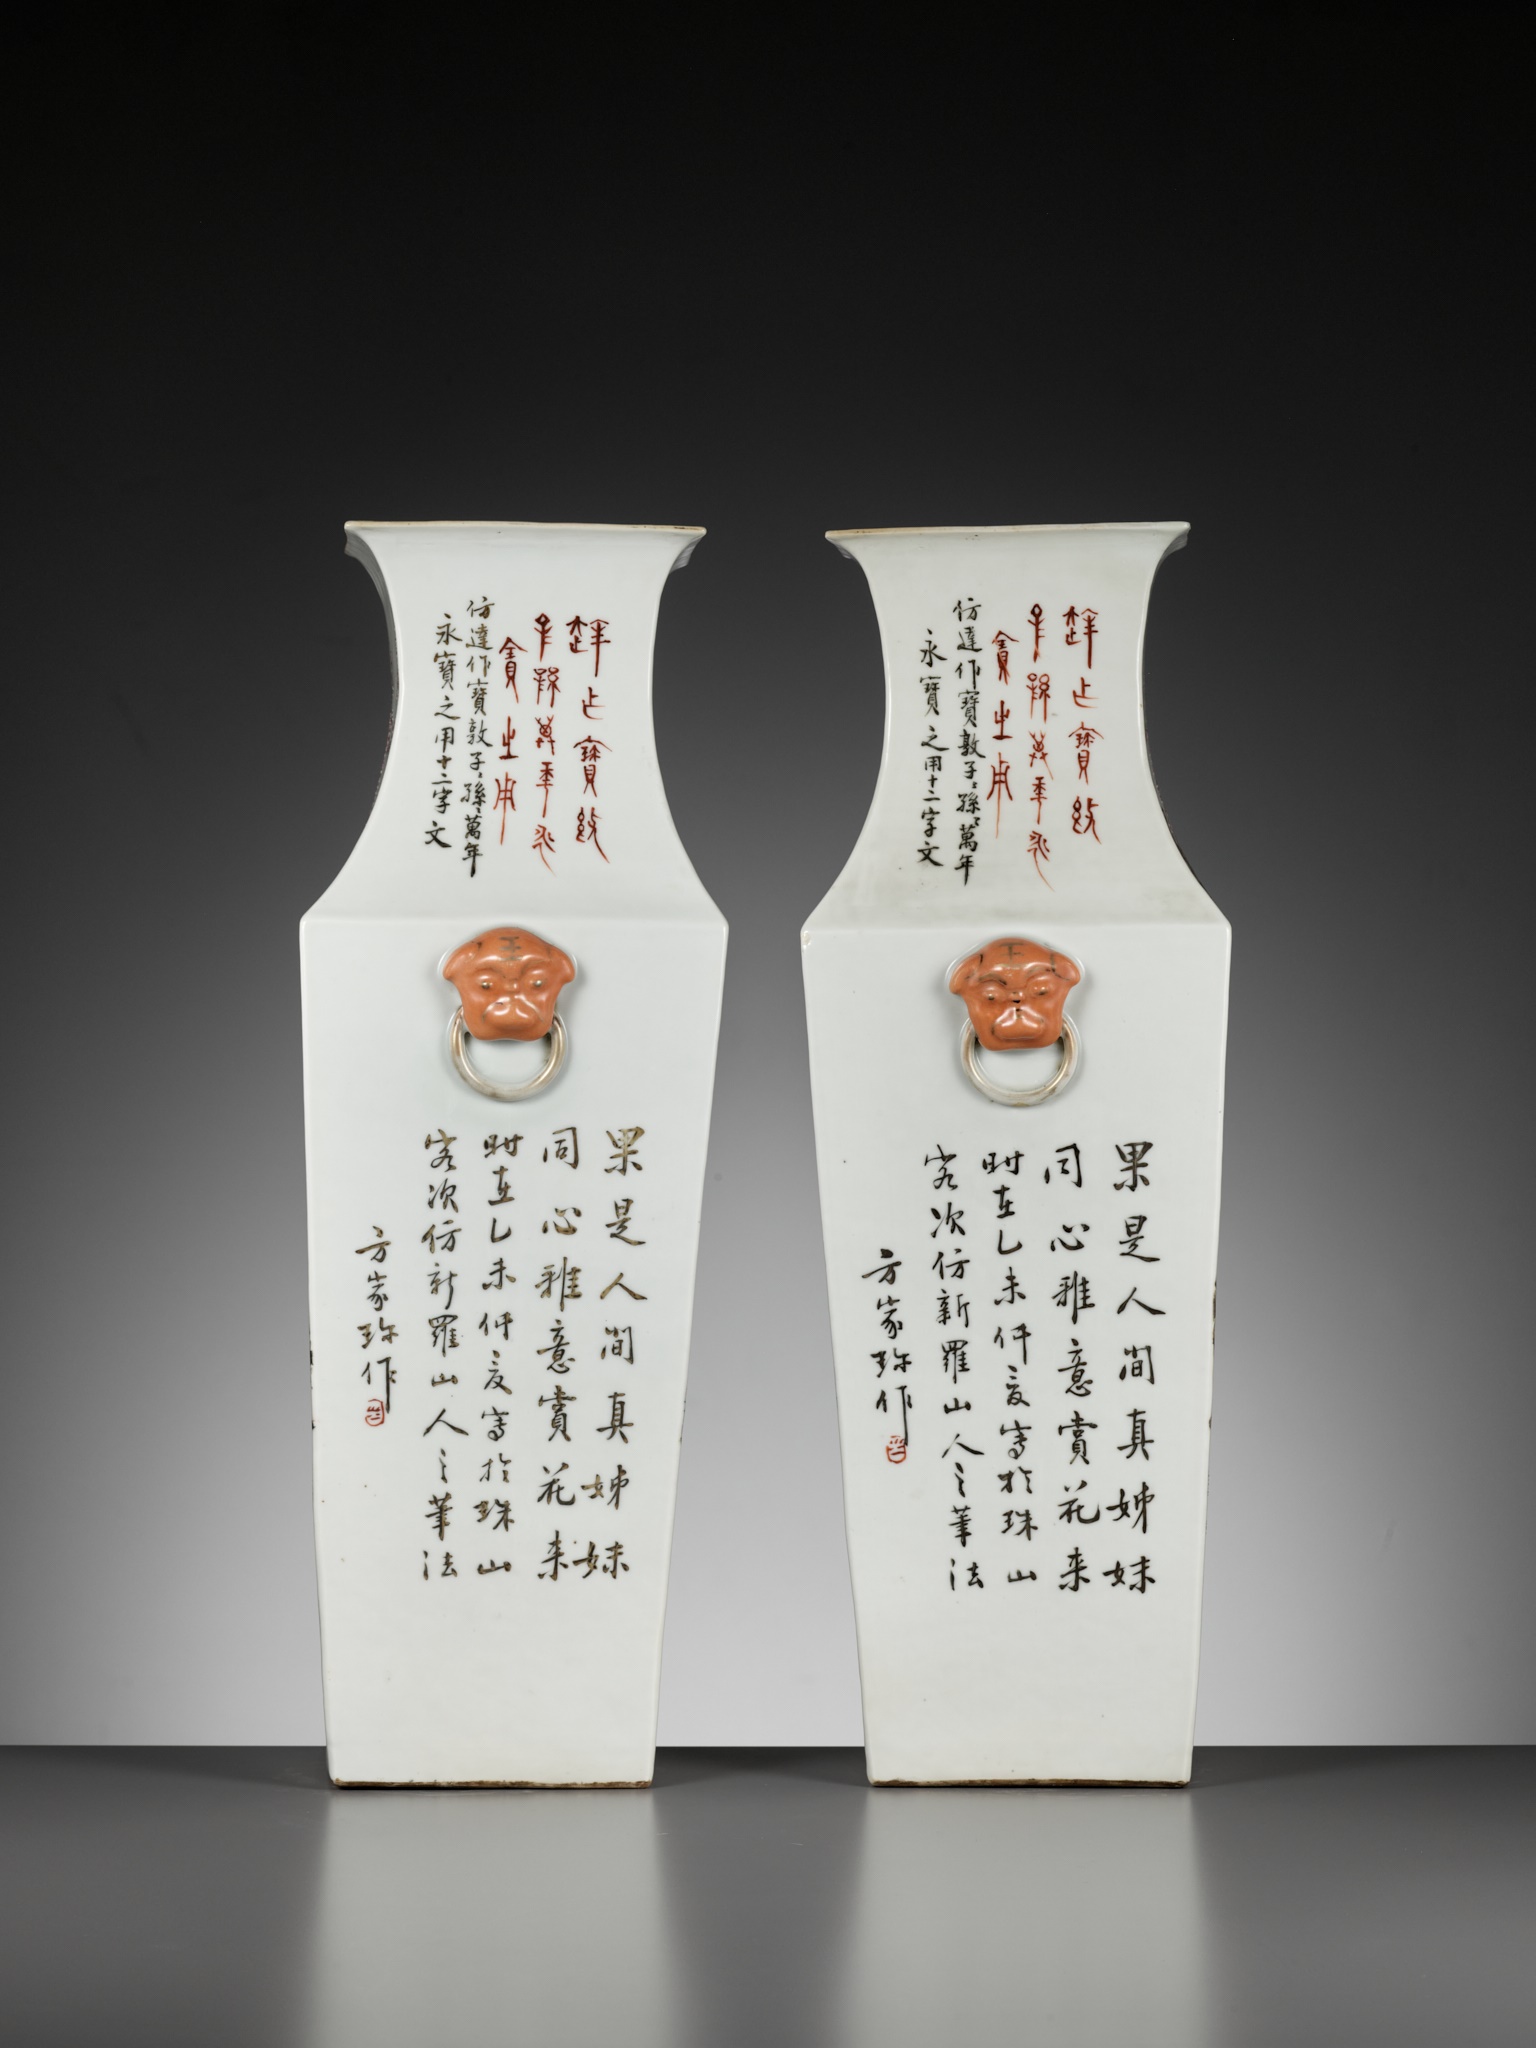 A PAIR OF LARGE QIANJIANG CAI VASES, BY FANG JIAZHEN, CHINA, DATED 1895 - Image 13 of 17